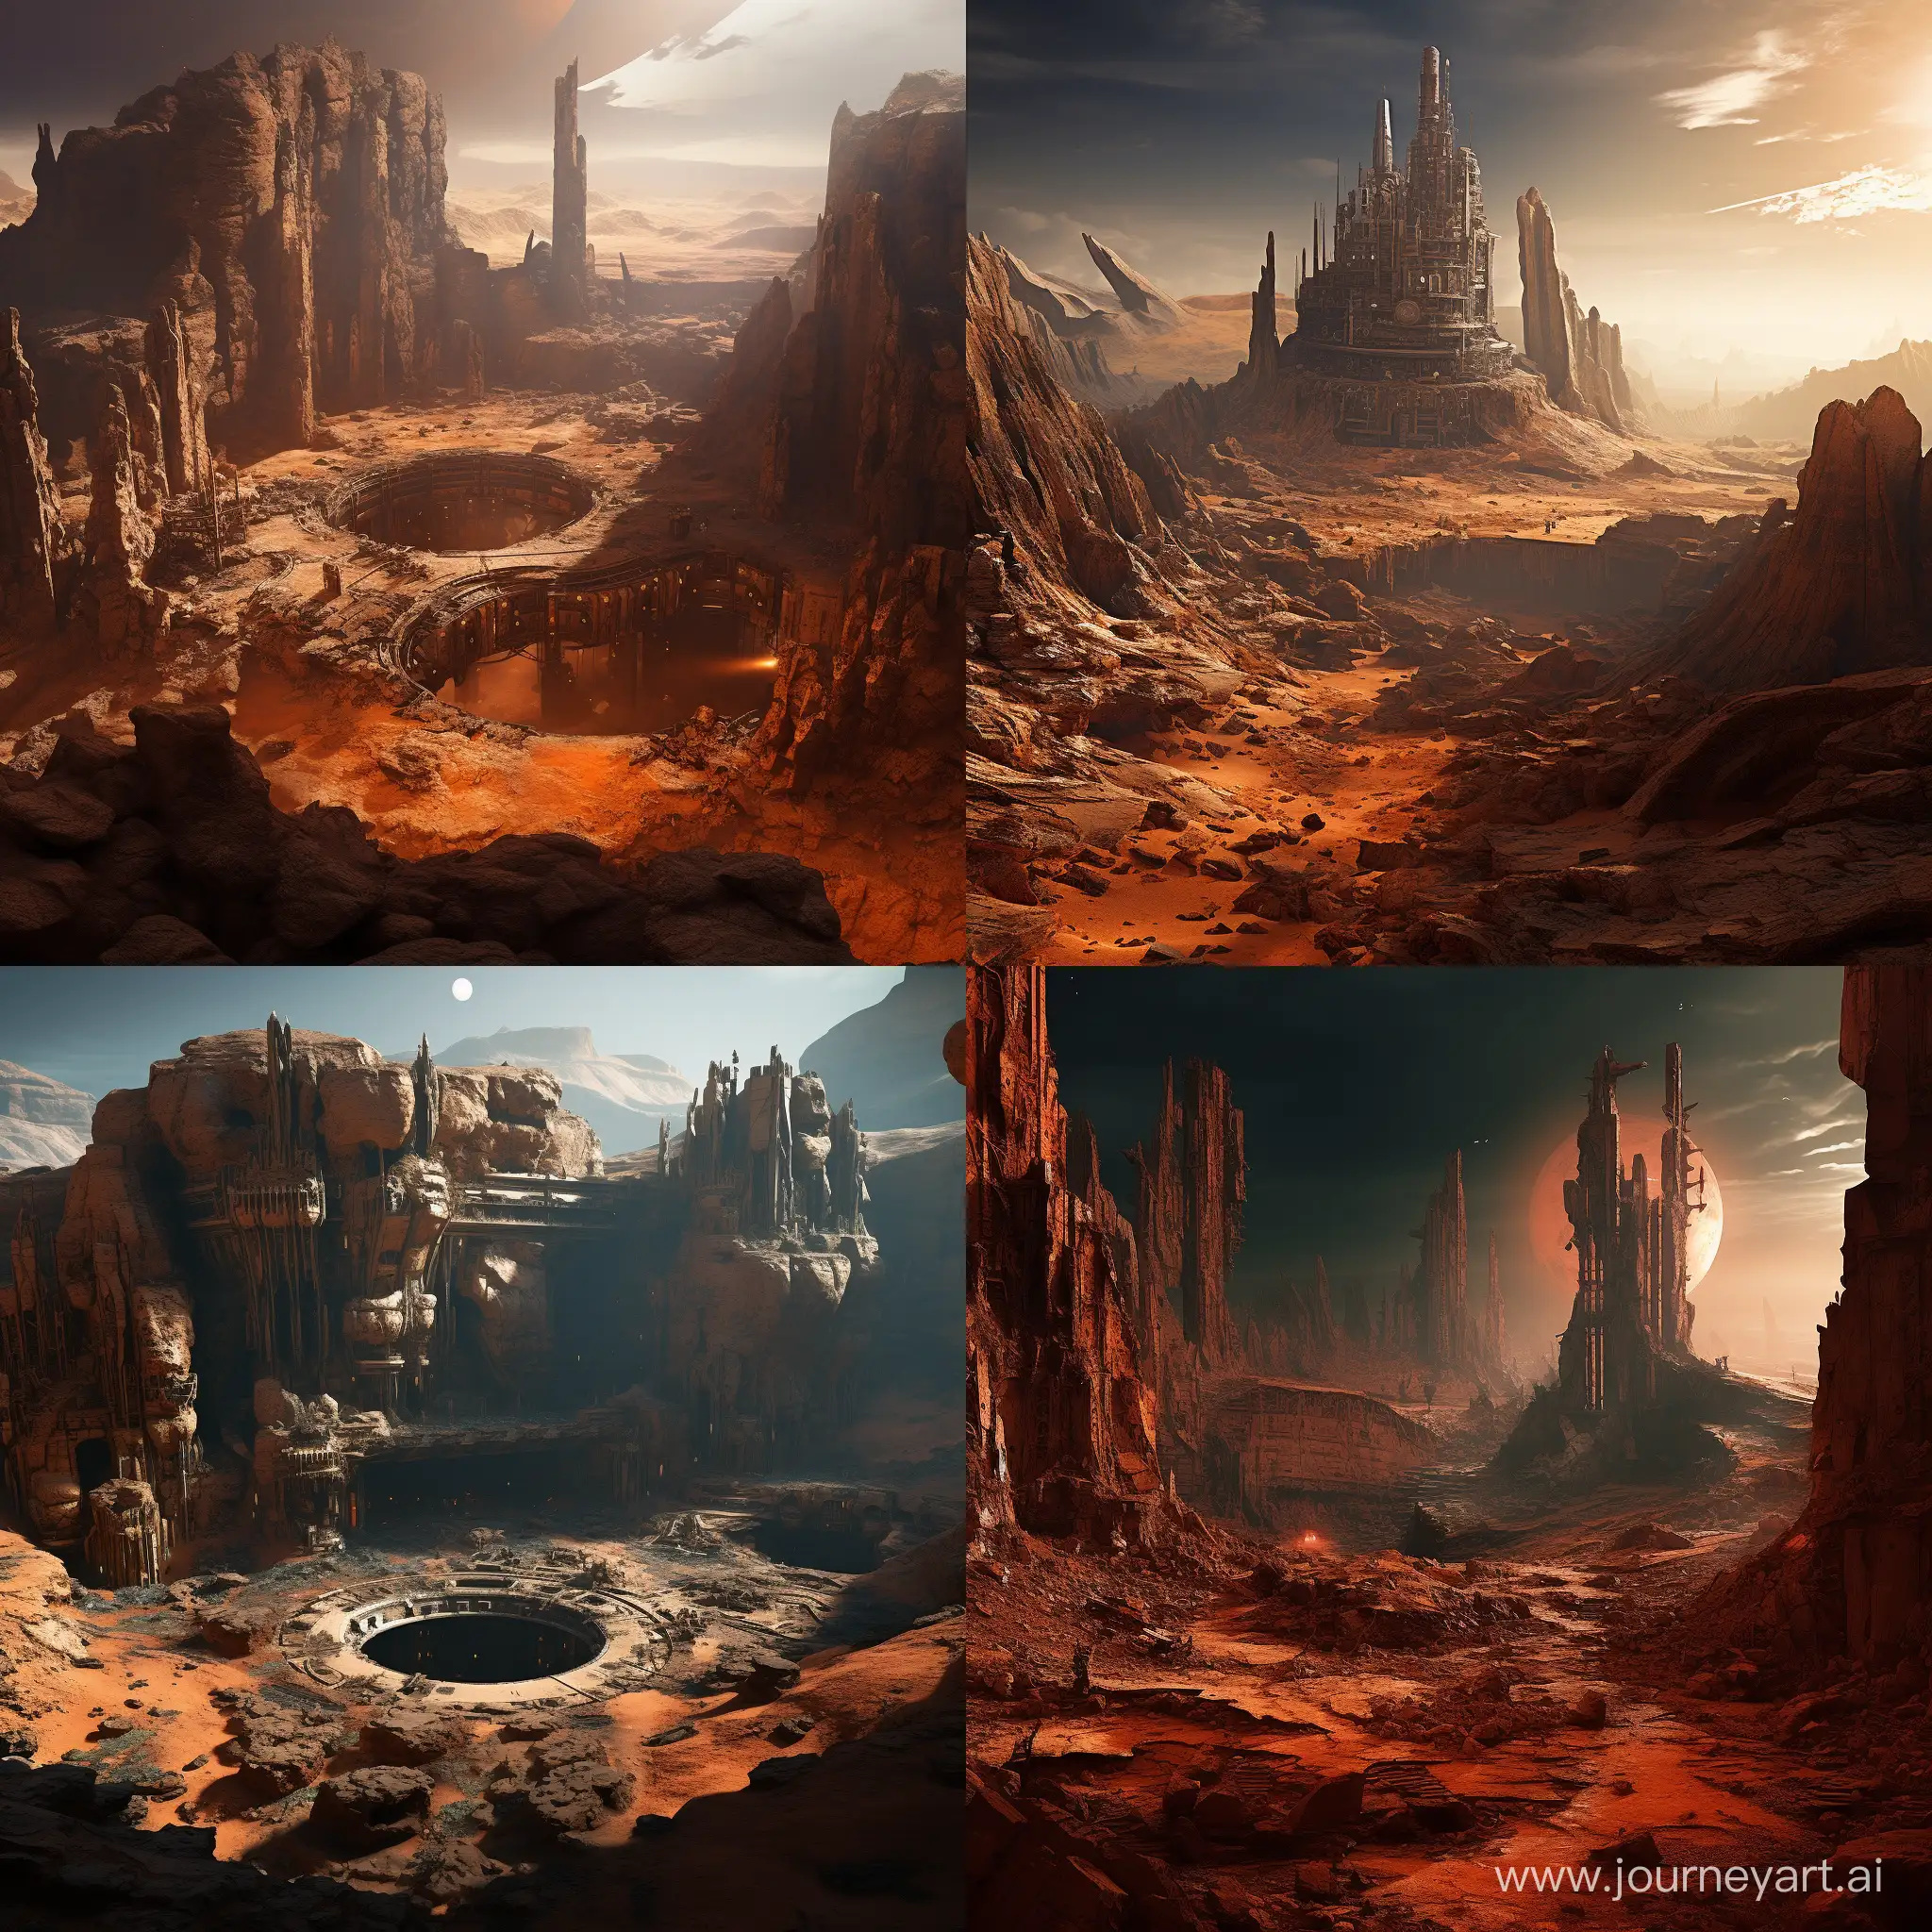 Exploring-Mars-Earth-Expedition-Unveils-Ruins-of-Ancient-Martian-City